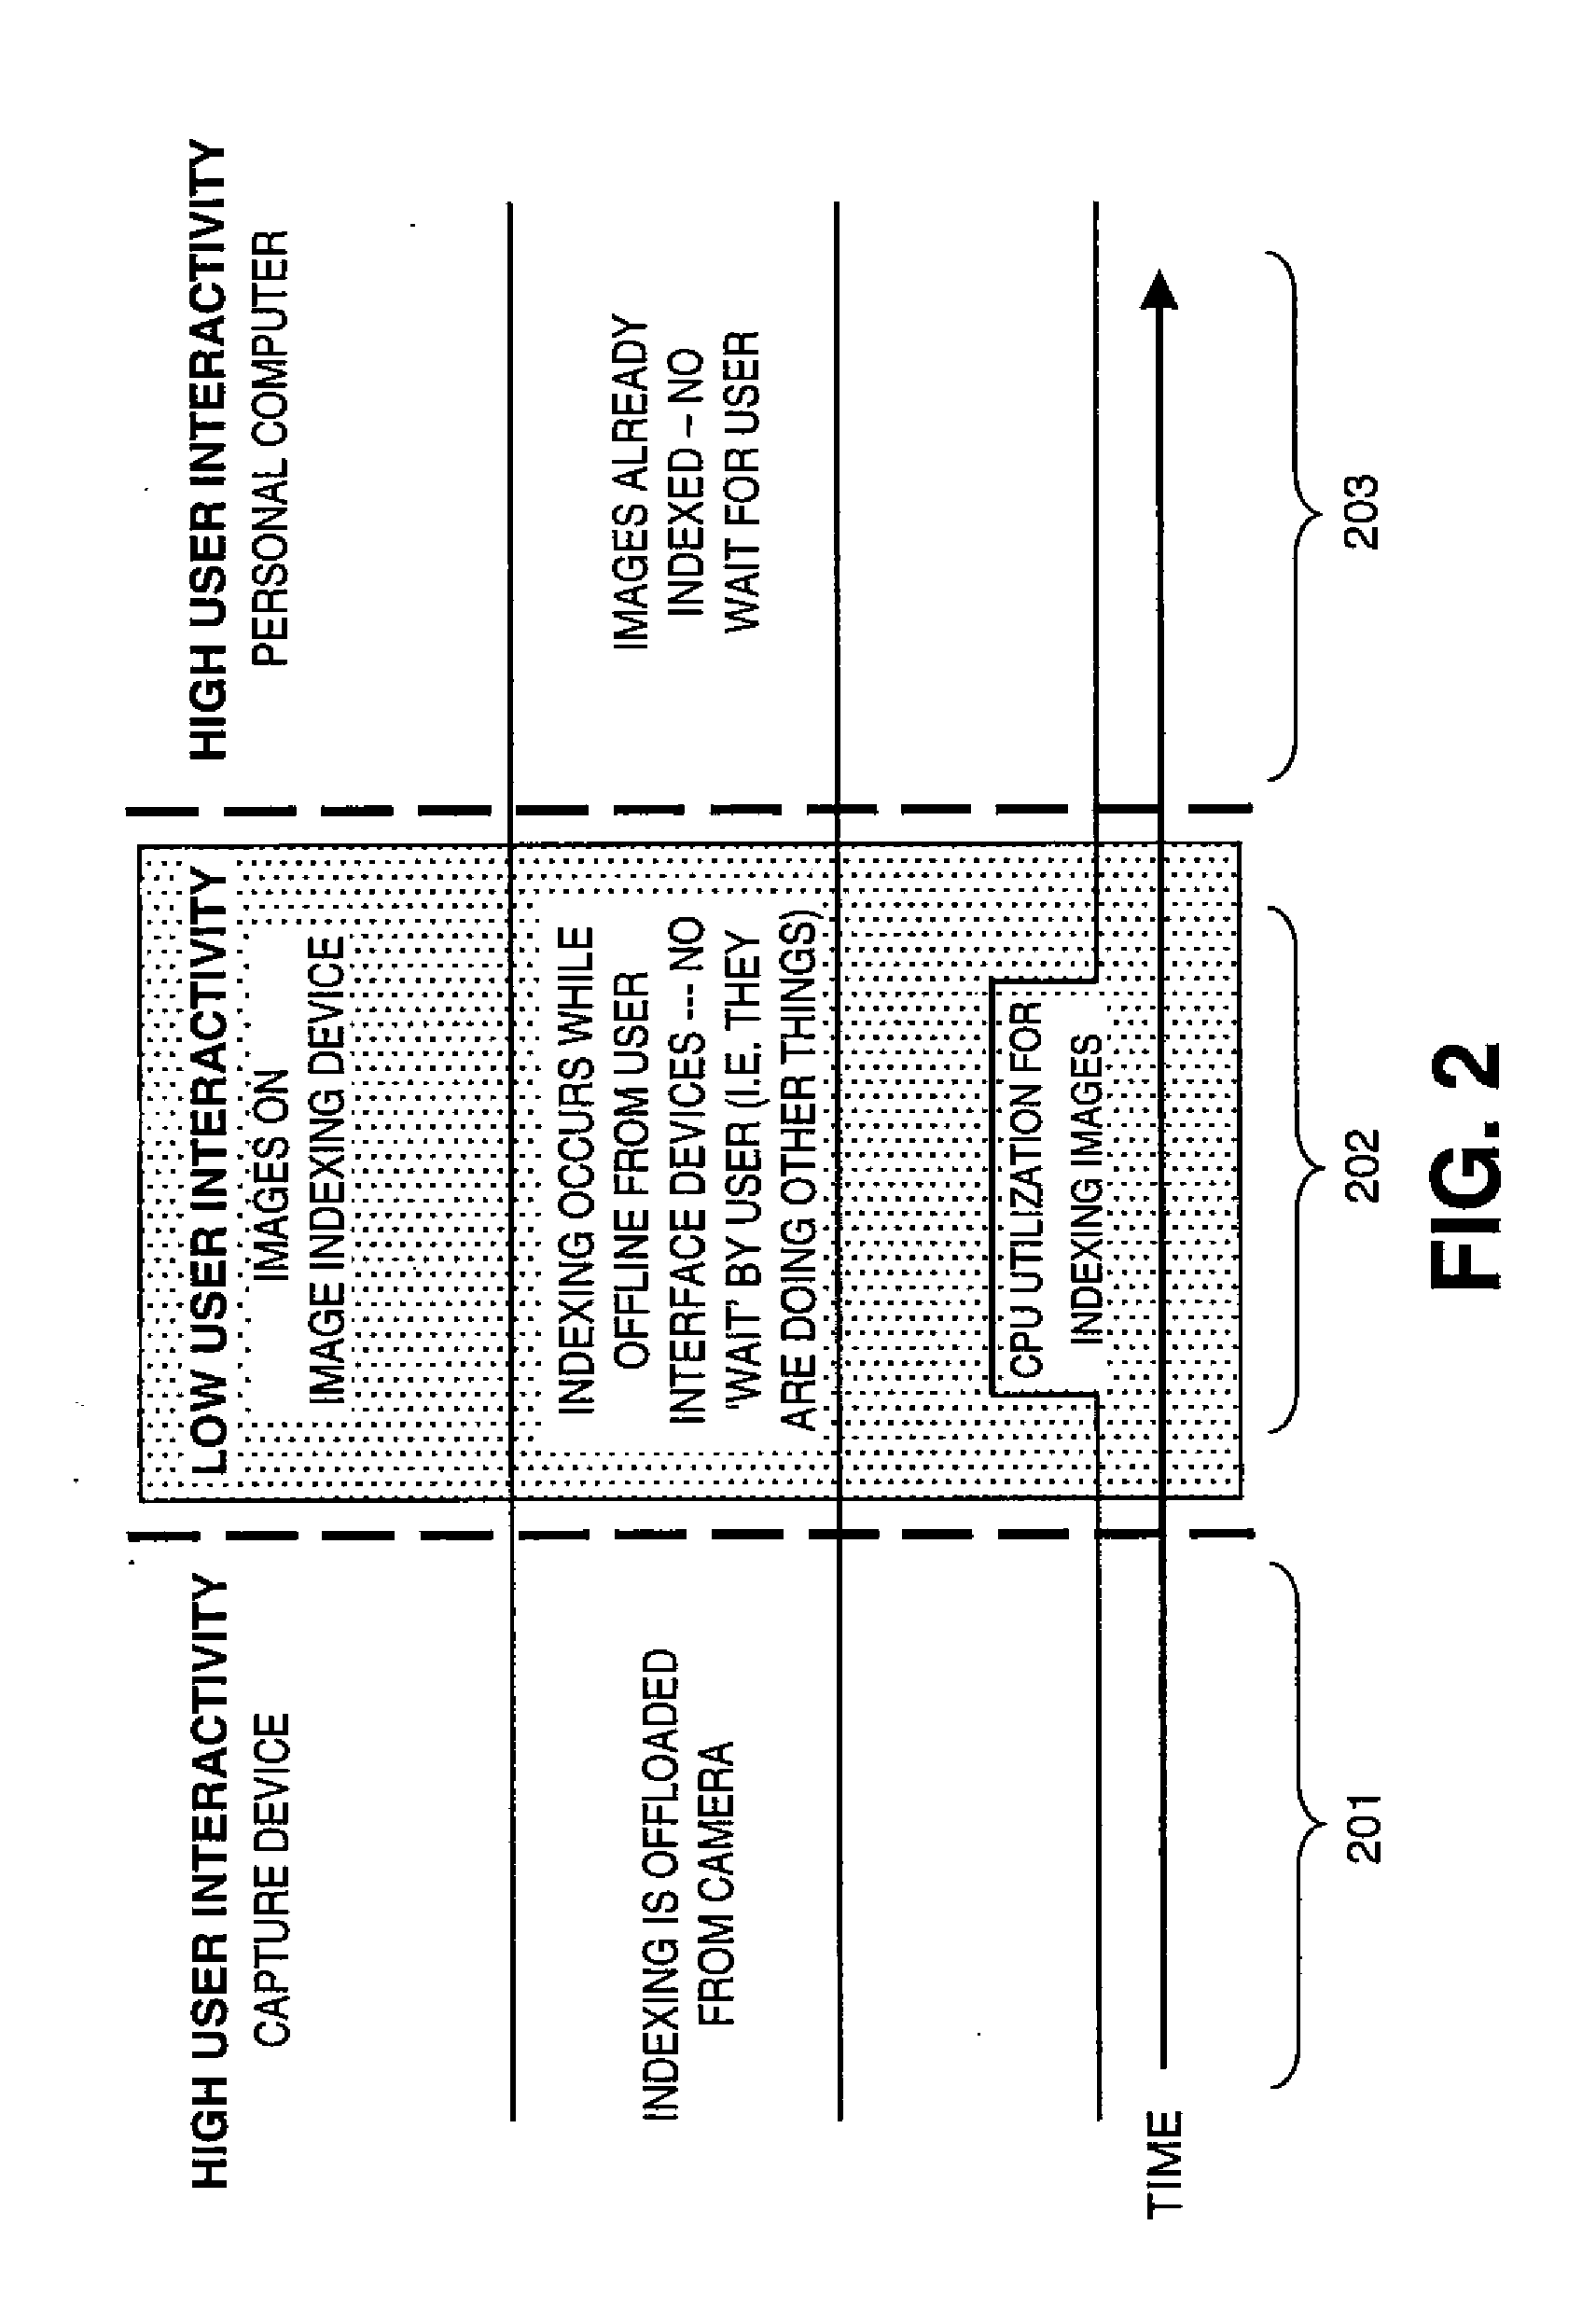 Portable image indexing device